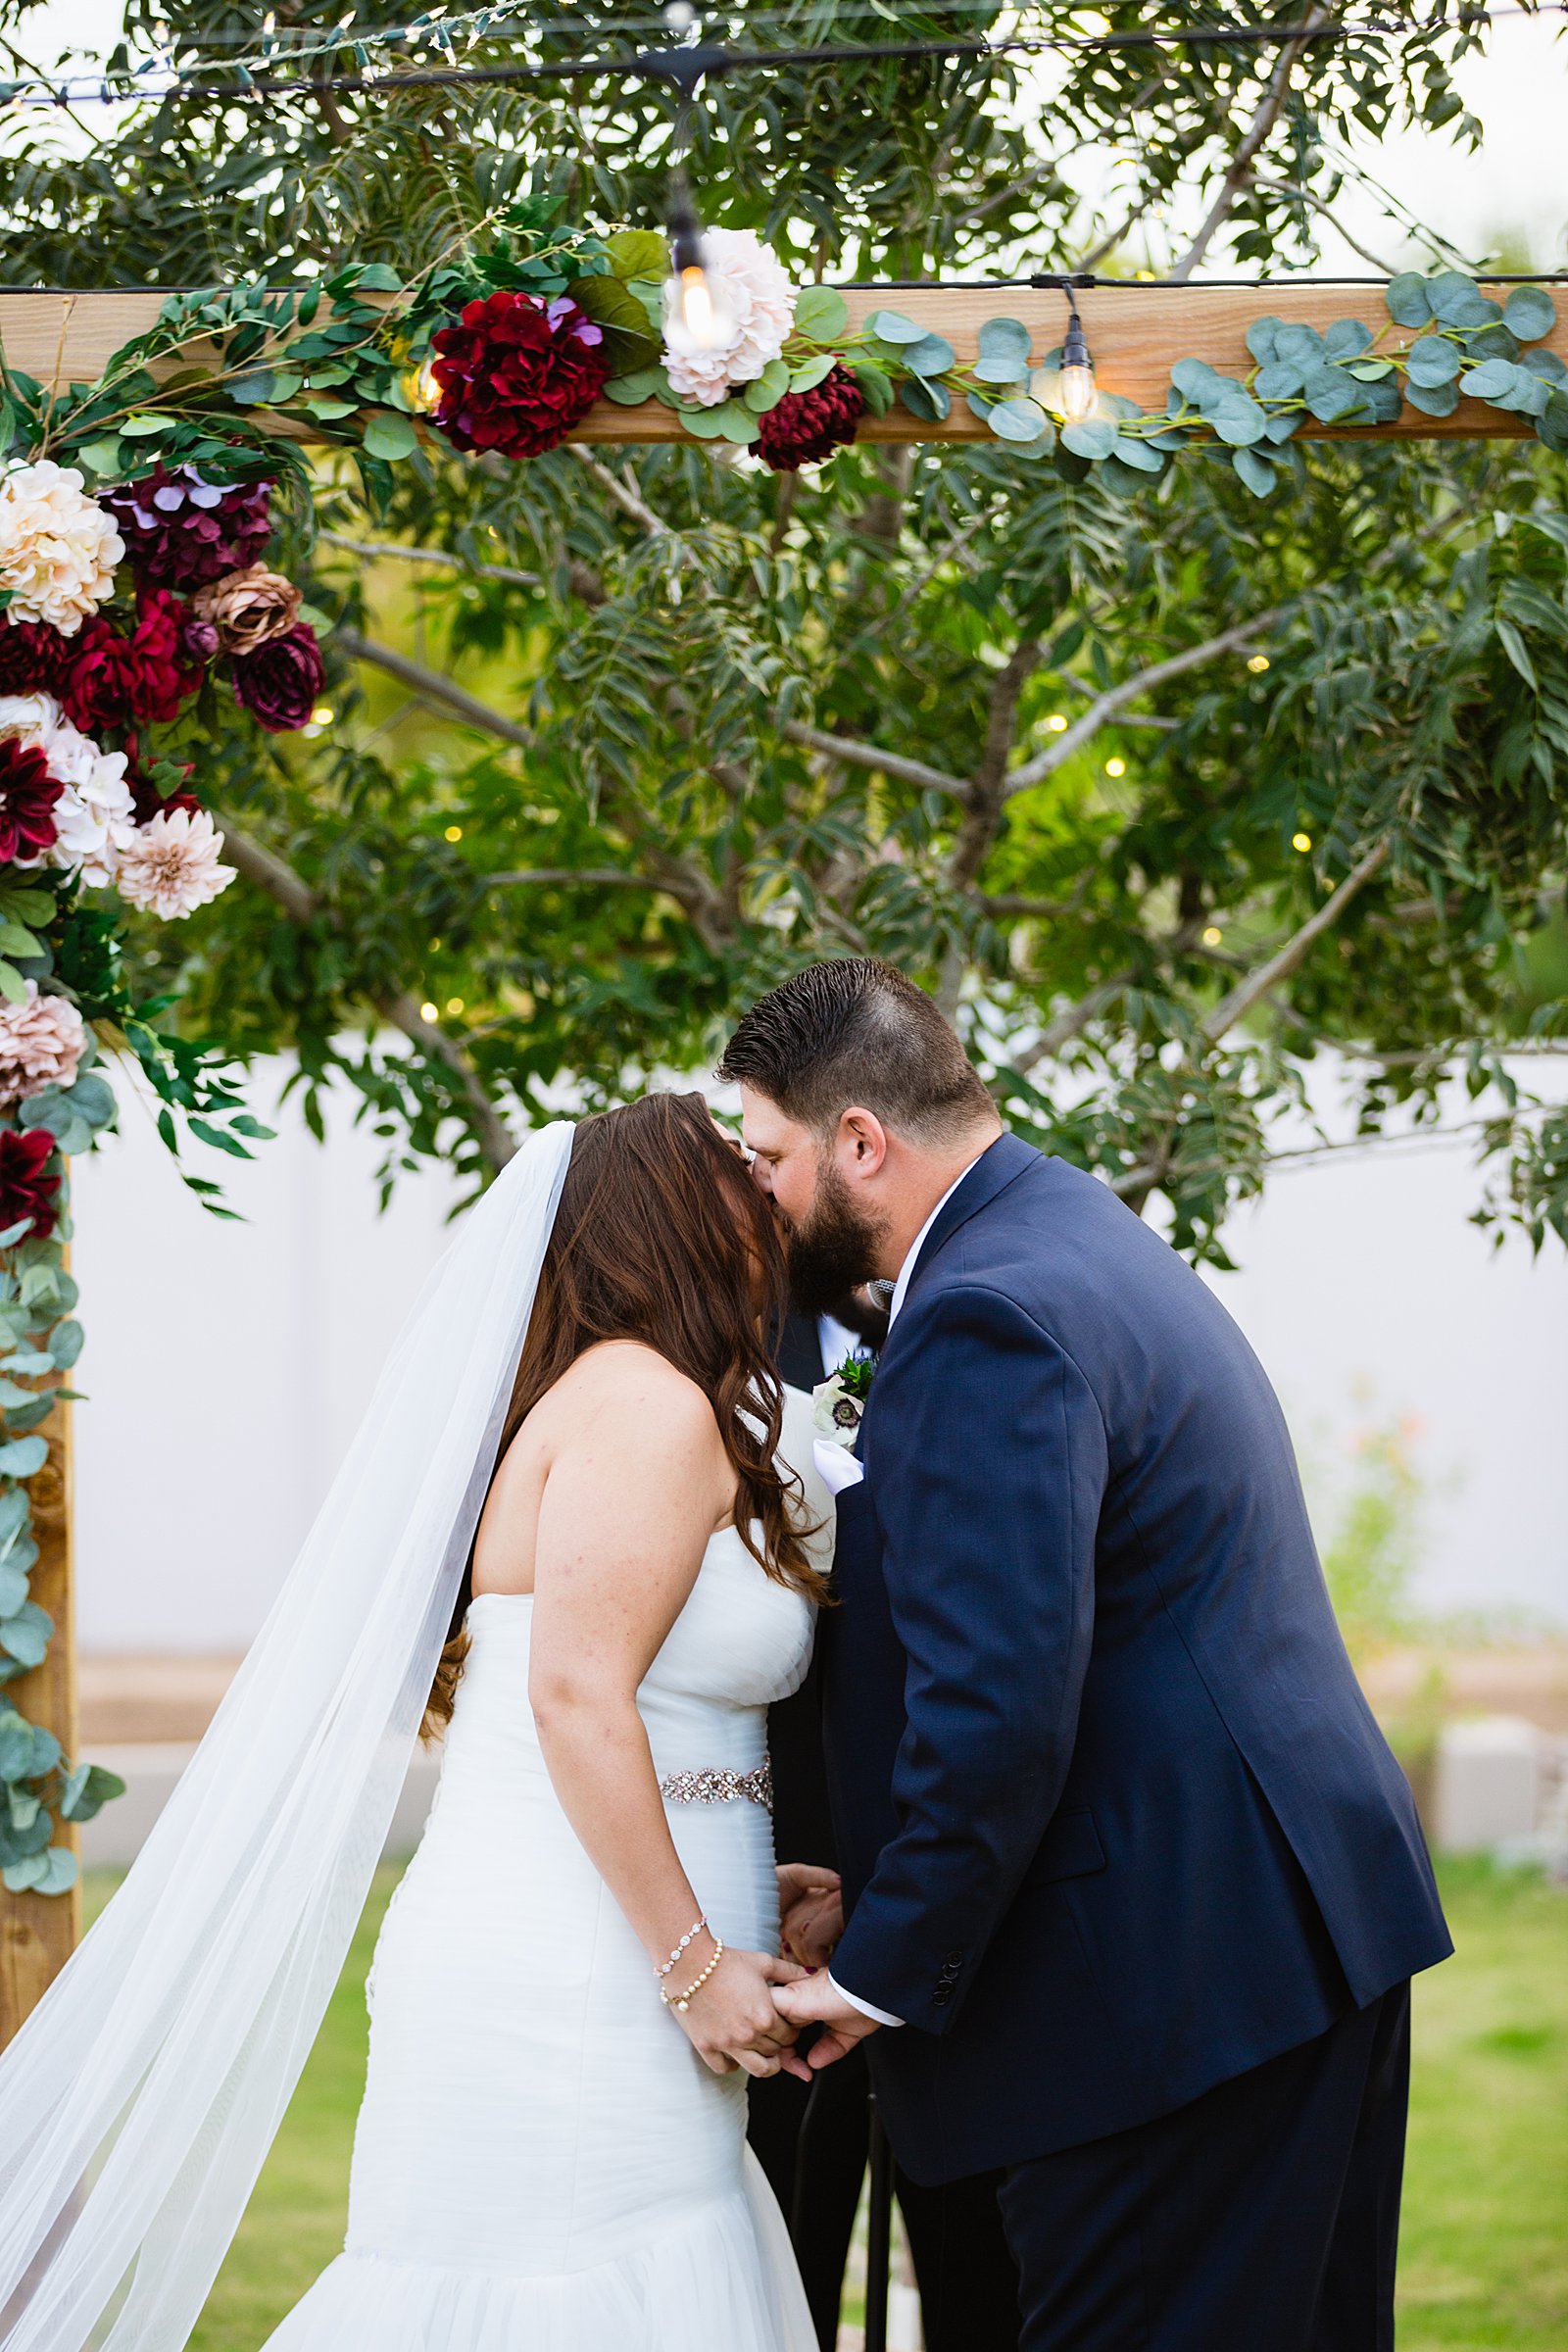 Bride and Groom share their first kiss during their wedding ceremony at an Arizona backyard by Arizona wedding photographer PMA Photography.